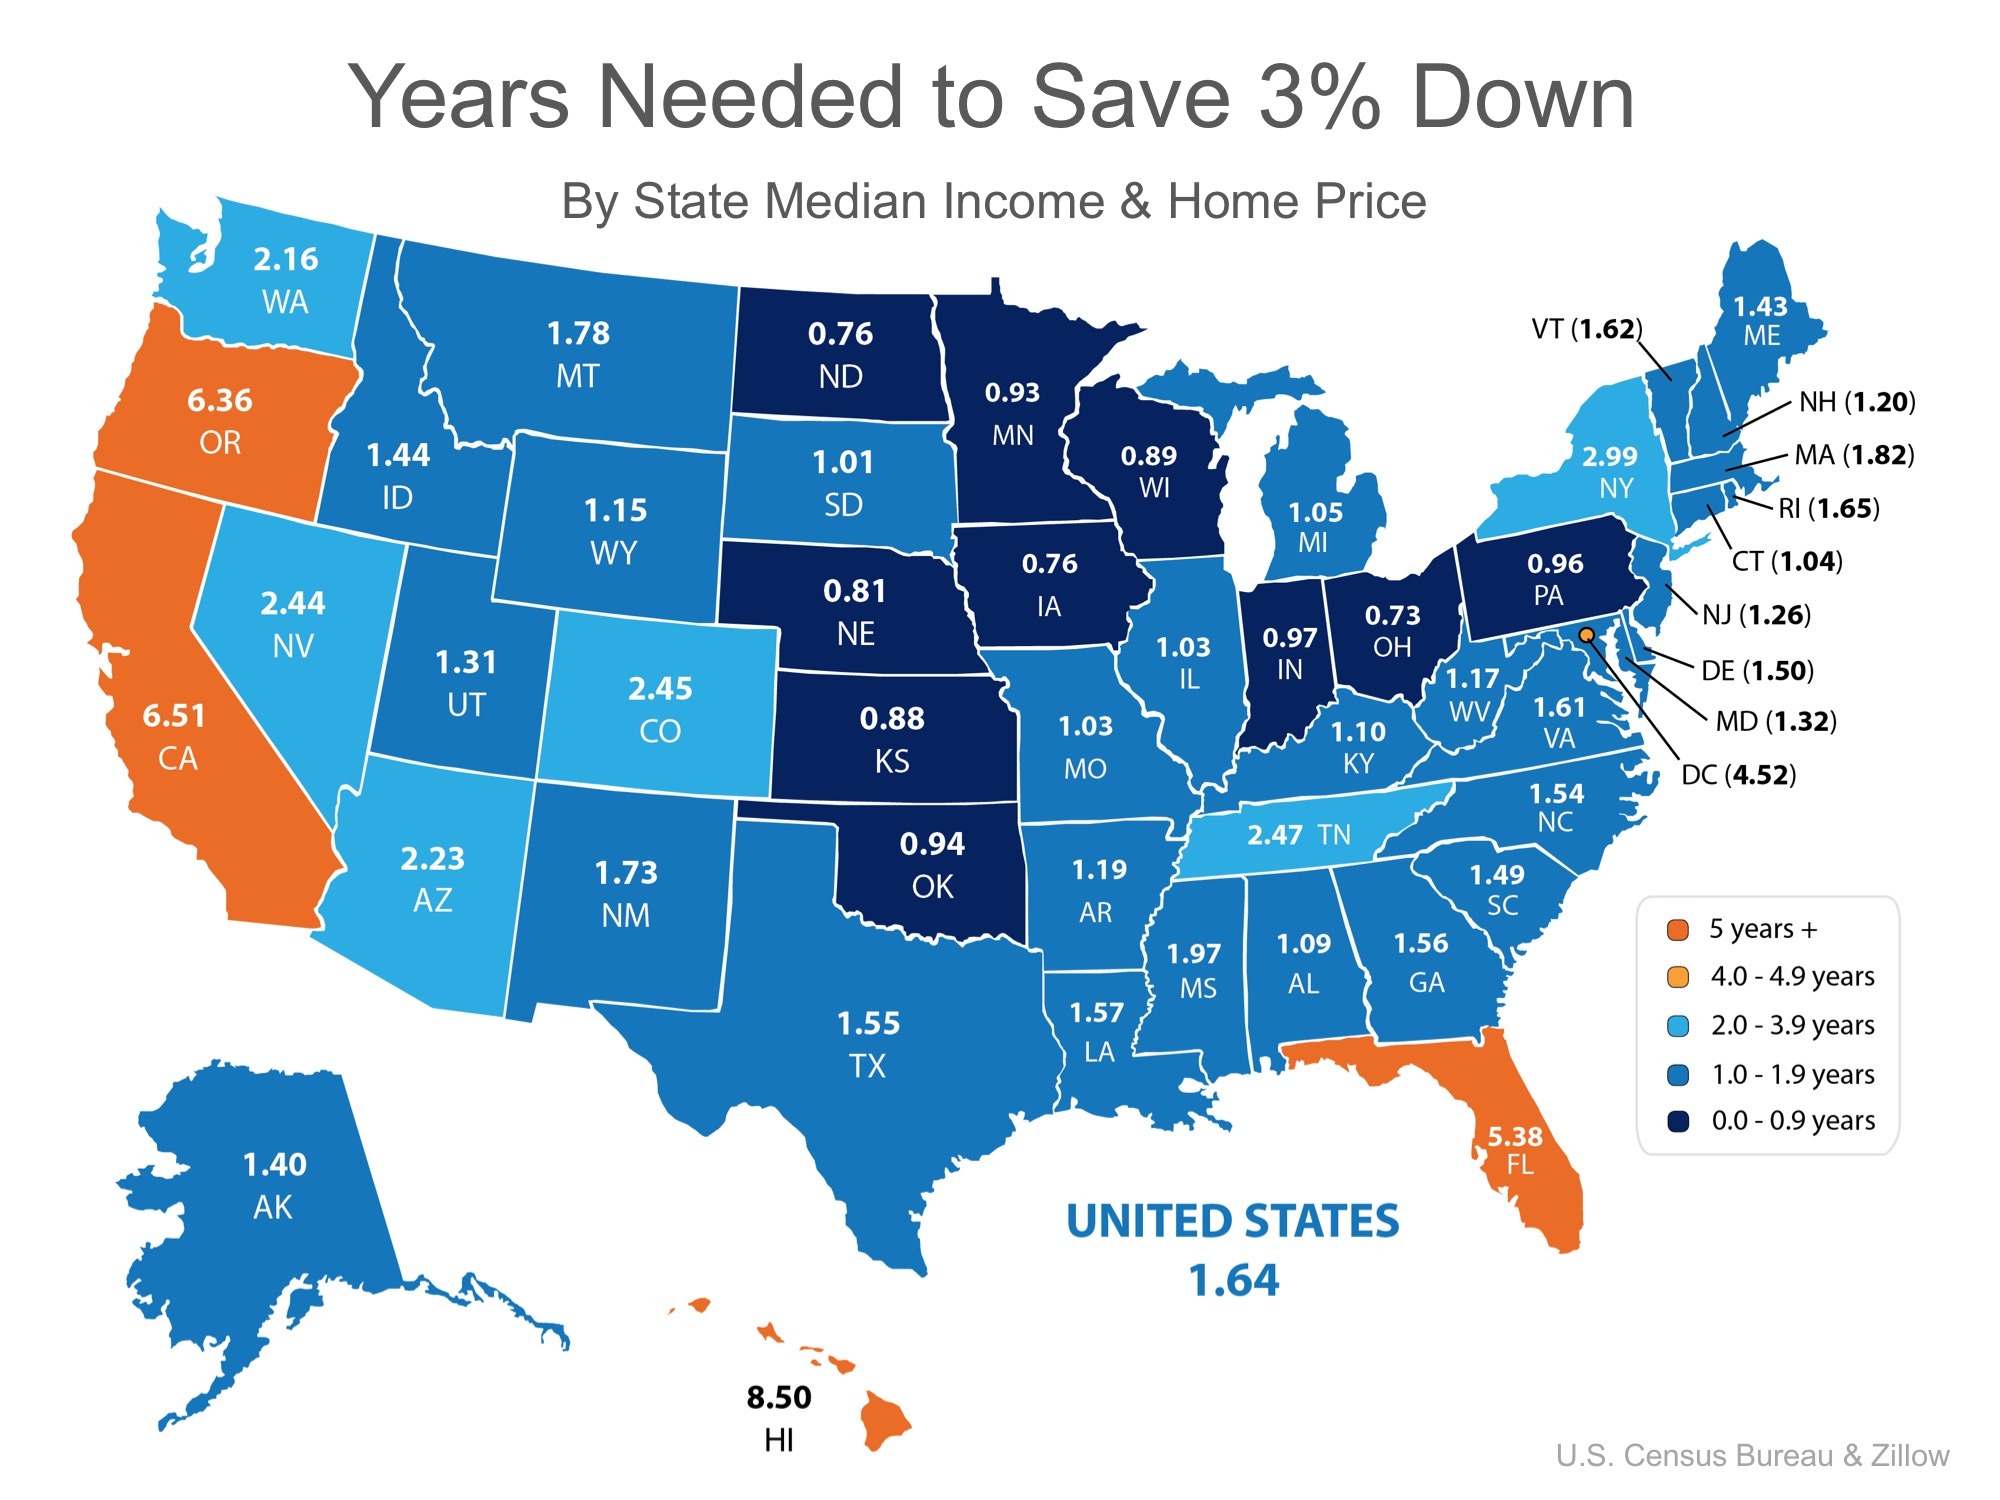 Years needed to save 3% down by state median income and home price map infographic